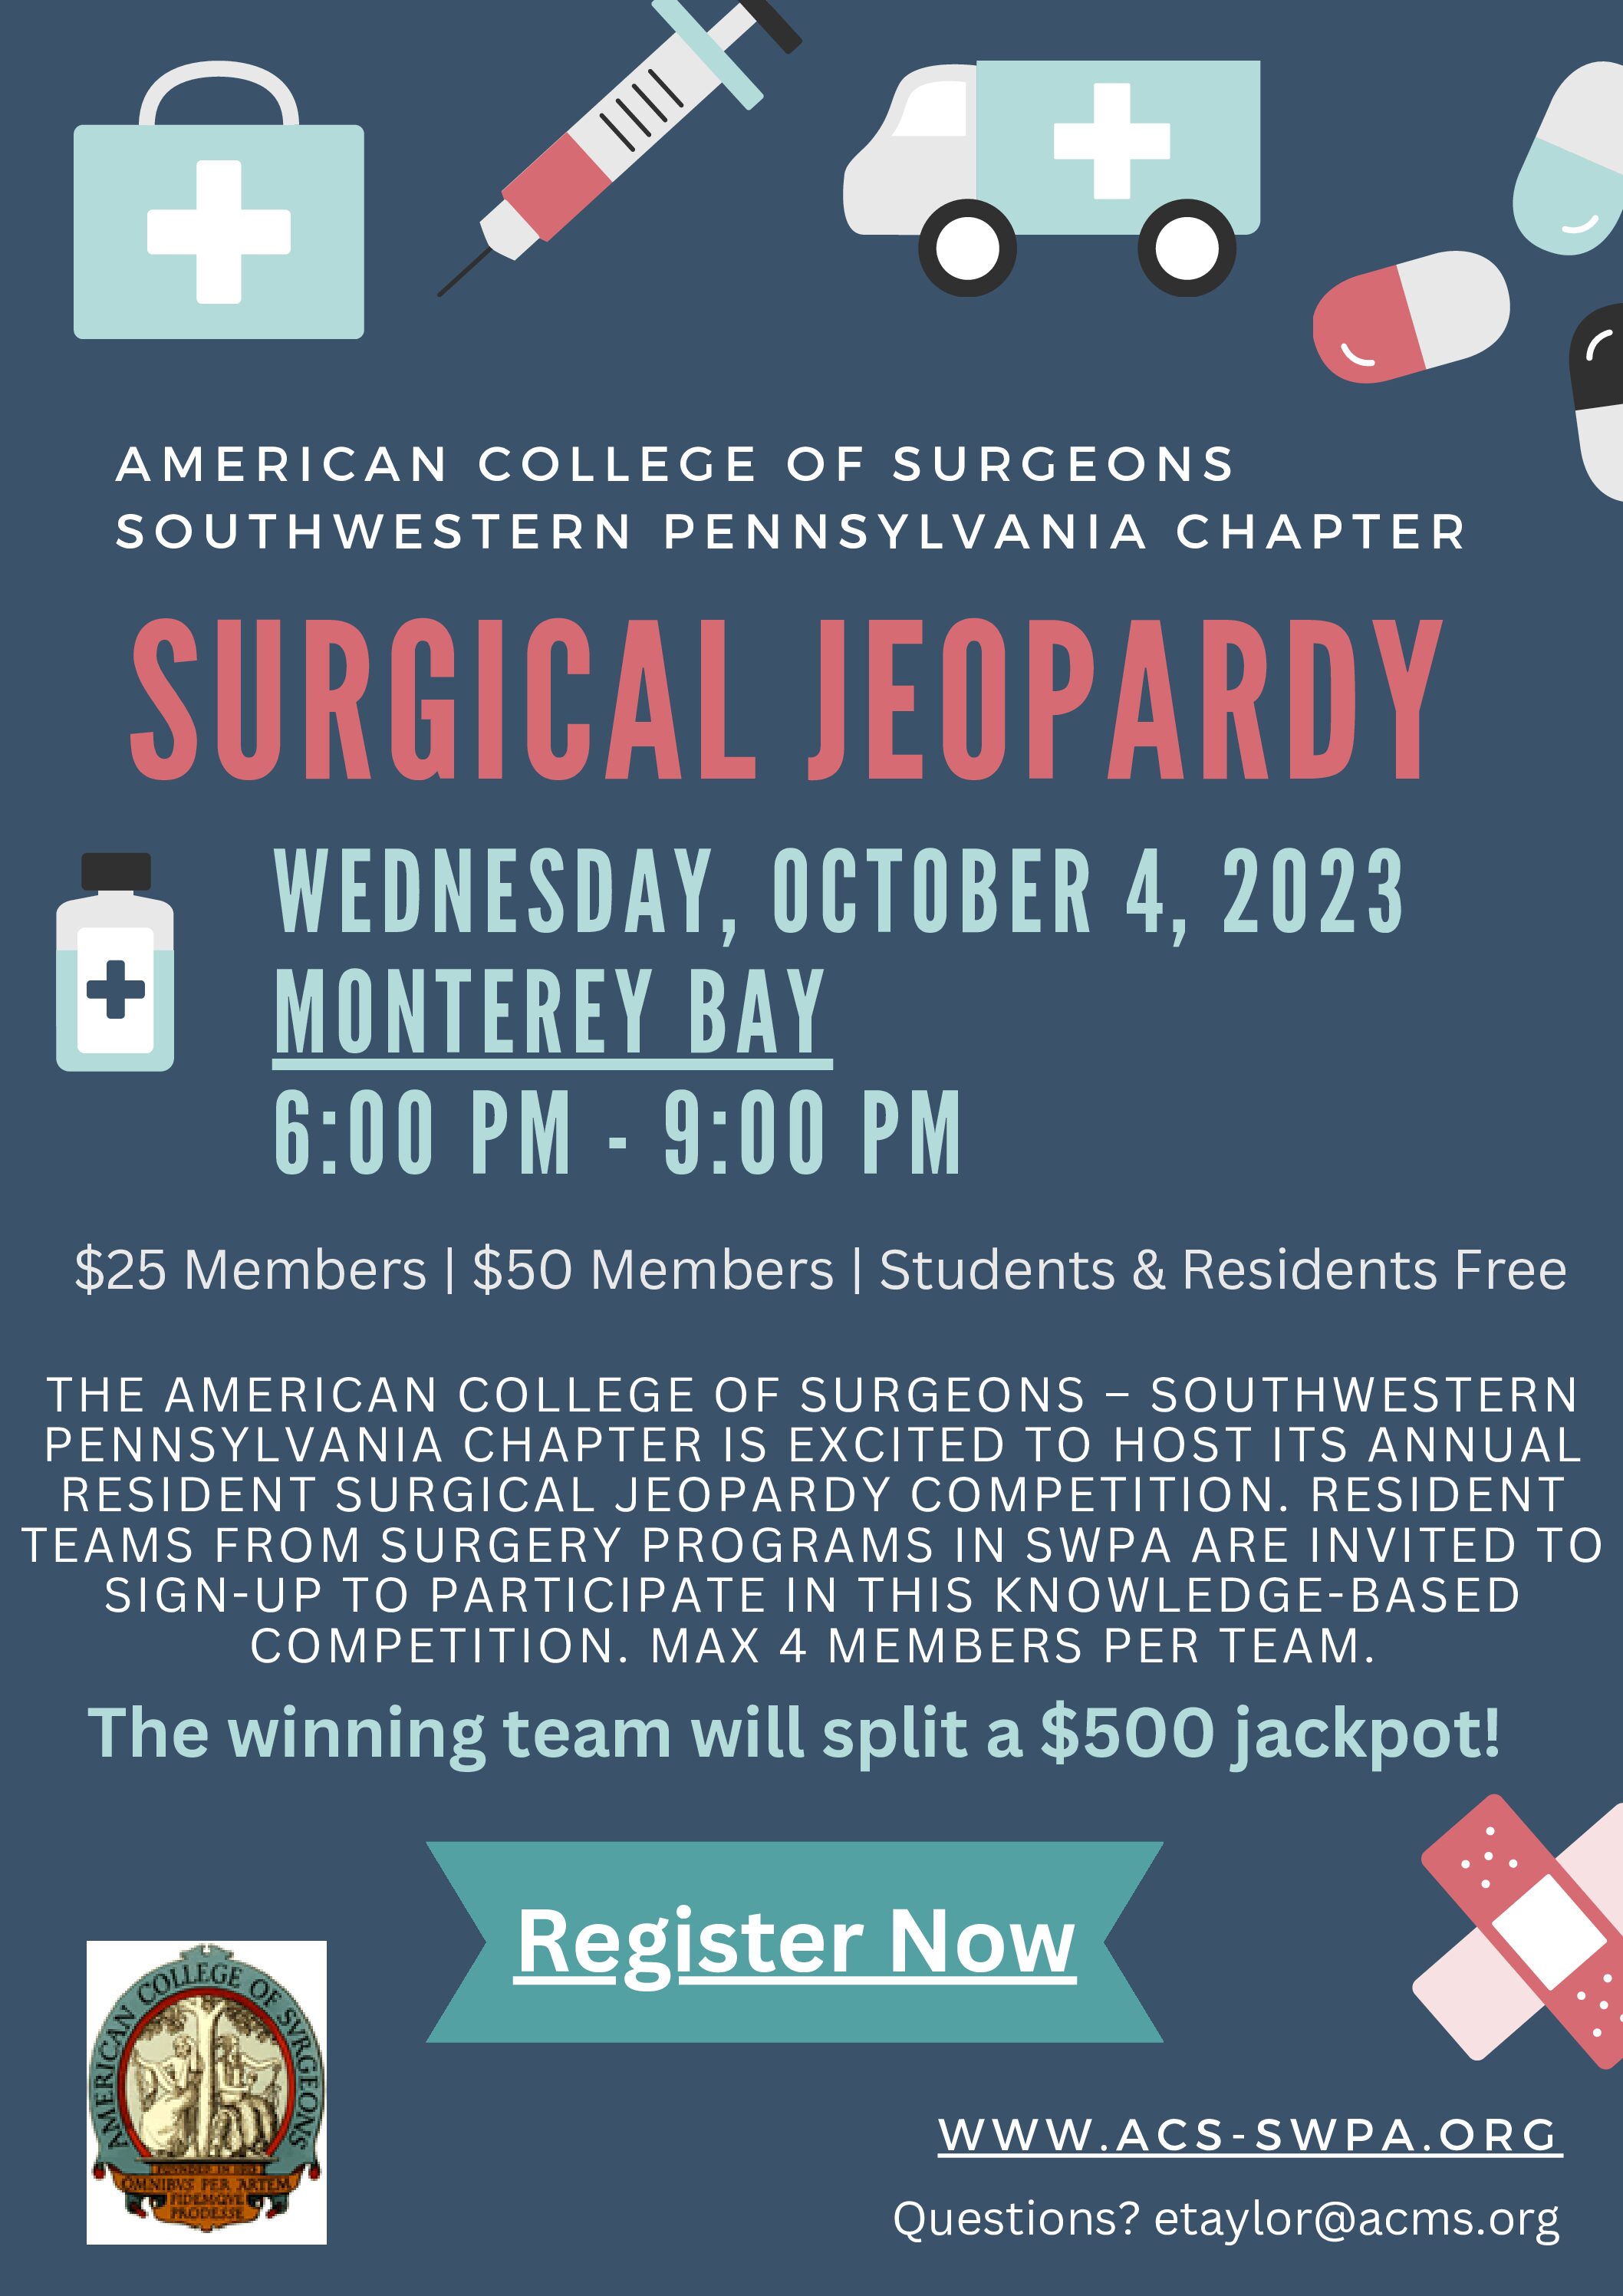 ACS-SWPA Surgical Jeopardy Competition and Dinner